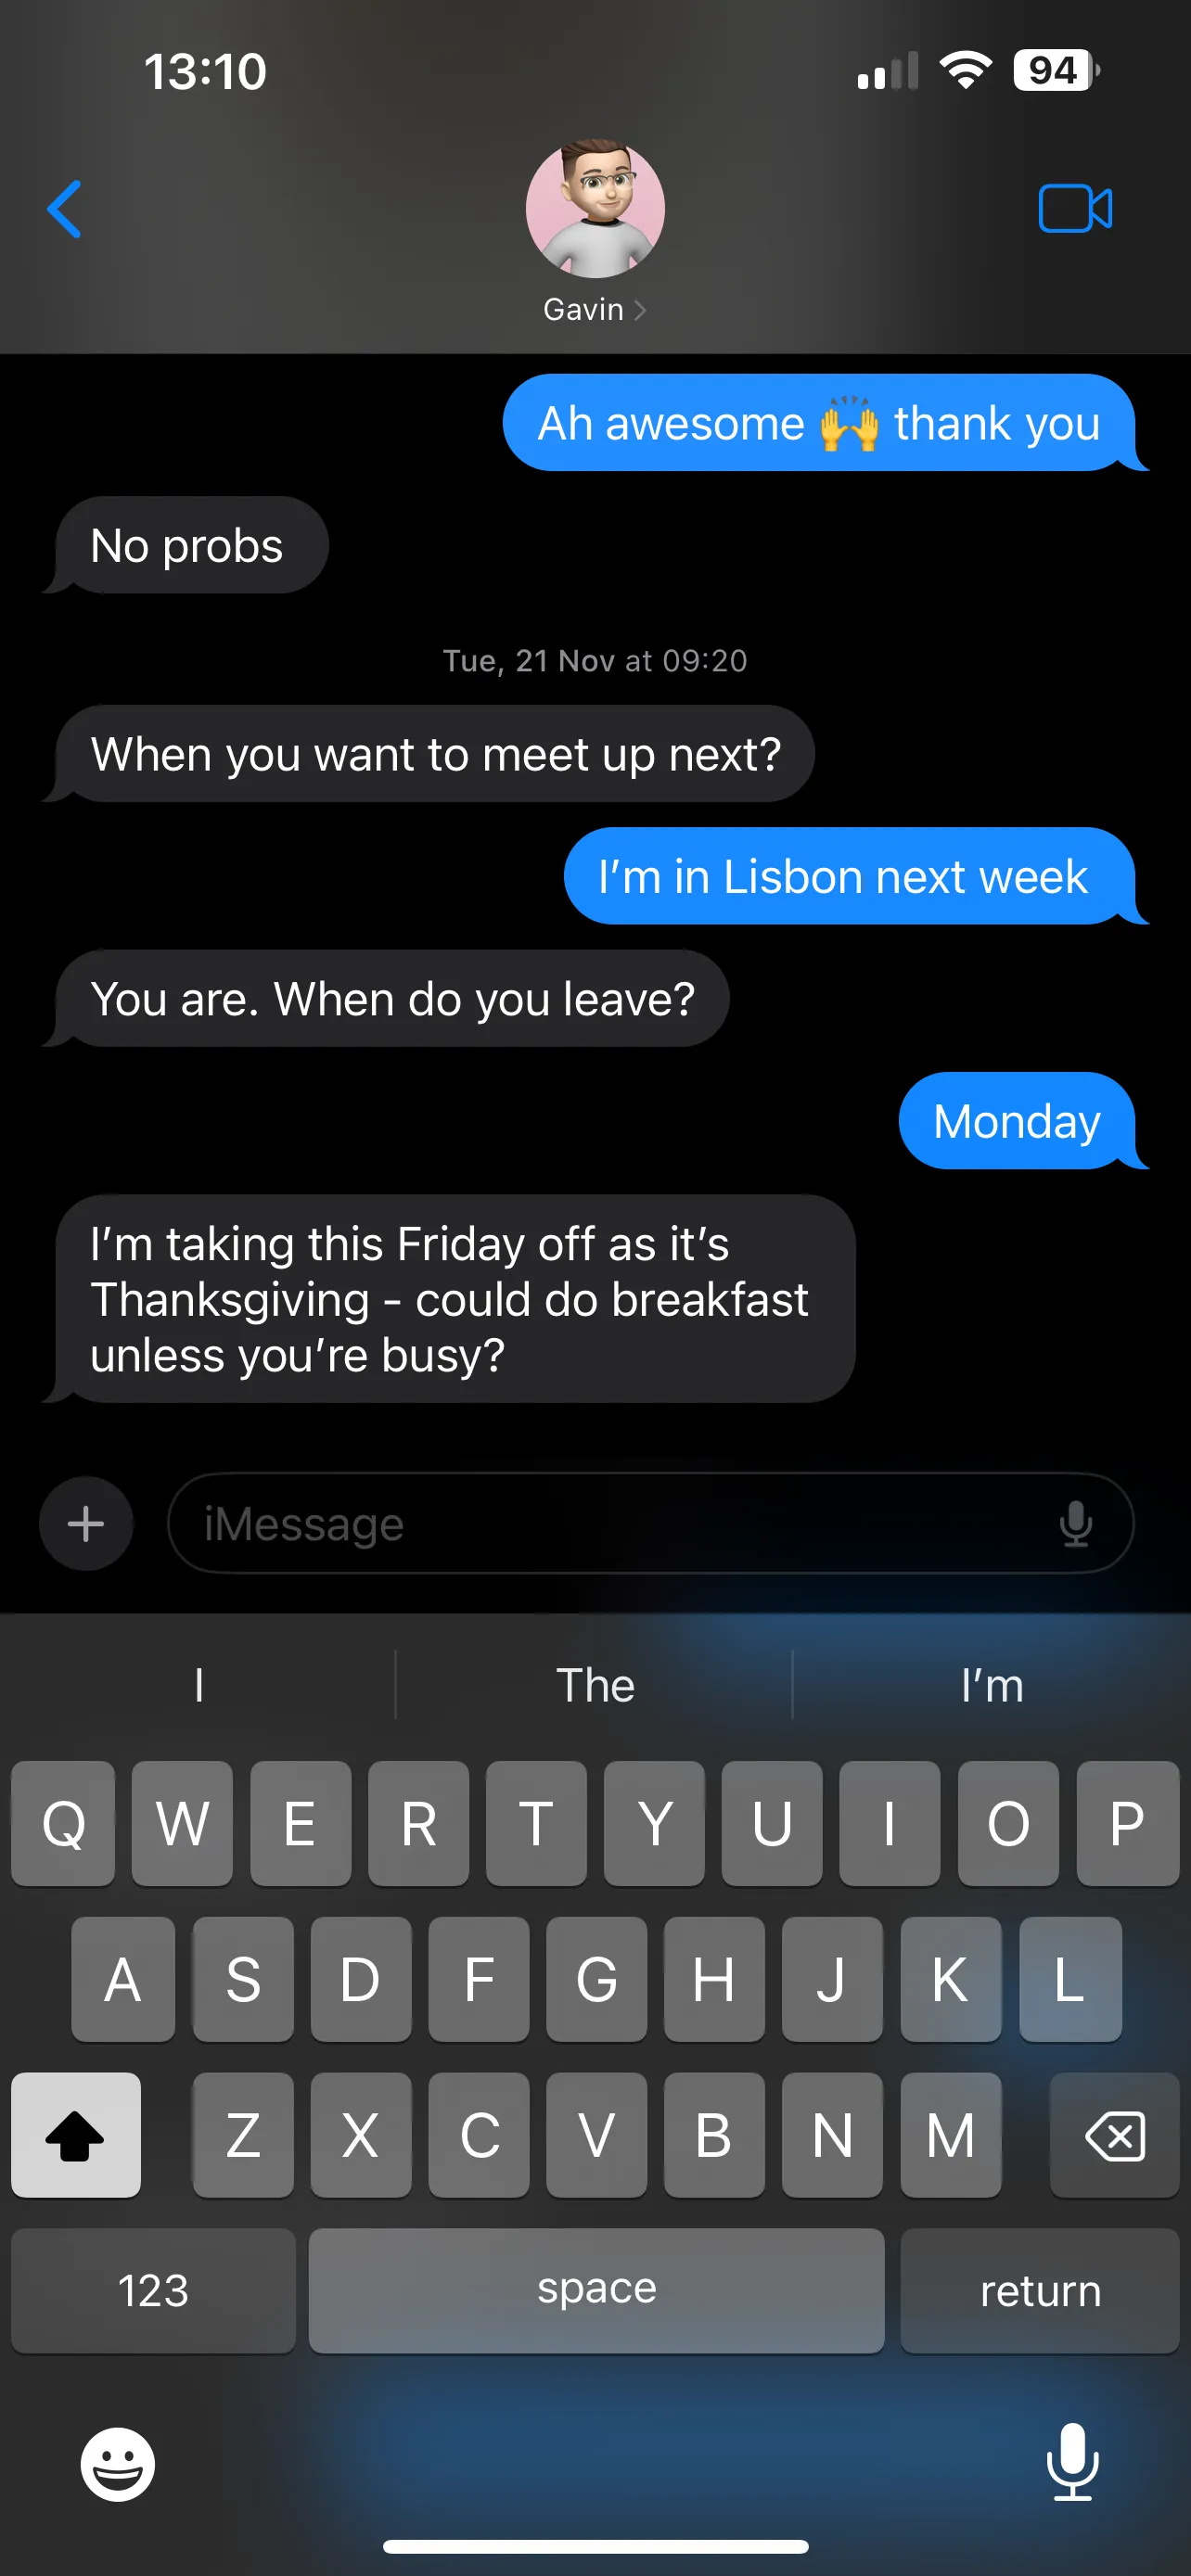 An iMessage conversation between Craig and Gavin. Gavins messages are highlighted as grey bubbles on the left hand side of the screen, and Craigs are blue on the right hand side of the screen. Gavin is asking Craig if he wants to meet up next week, but Craig is stating that he is in Lisbon and cannot make it.